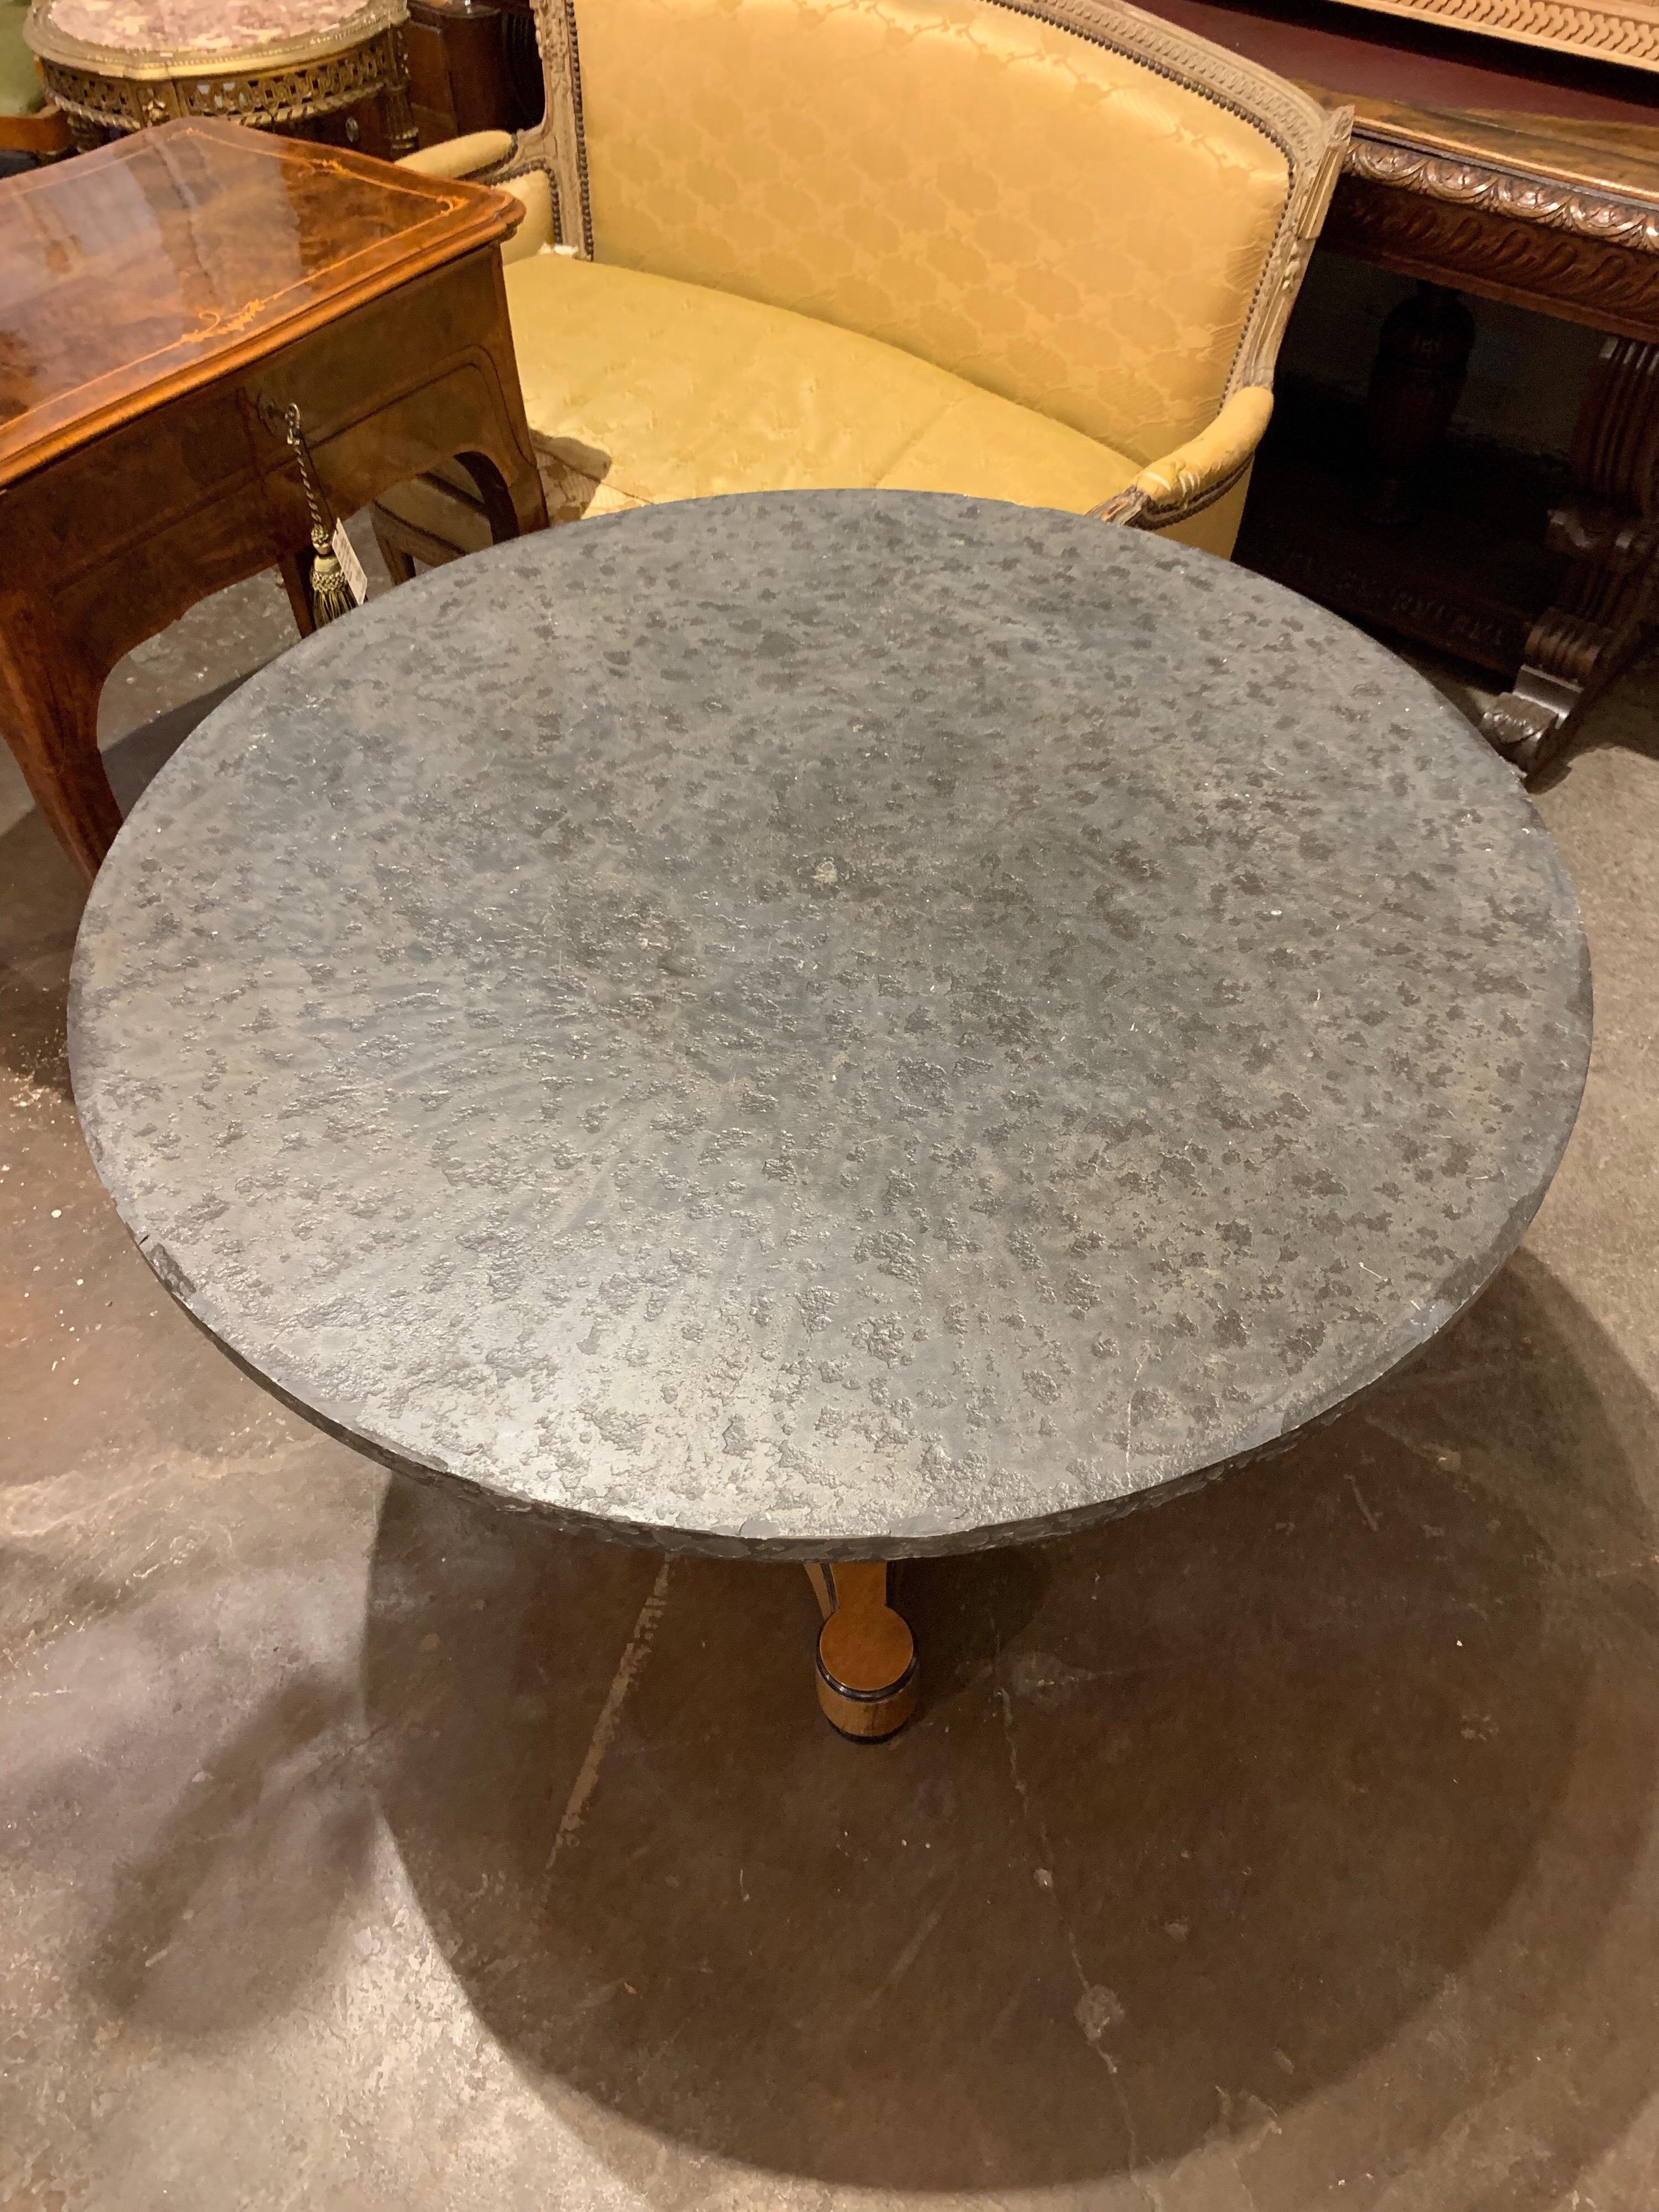 Very handsome continental mahogany and ebony center table. The top is made of grey colored slate. A very functional and beautiful table.